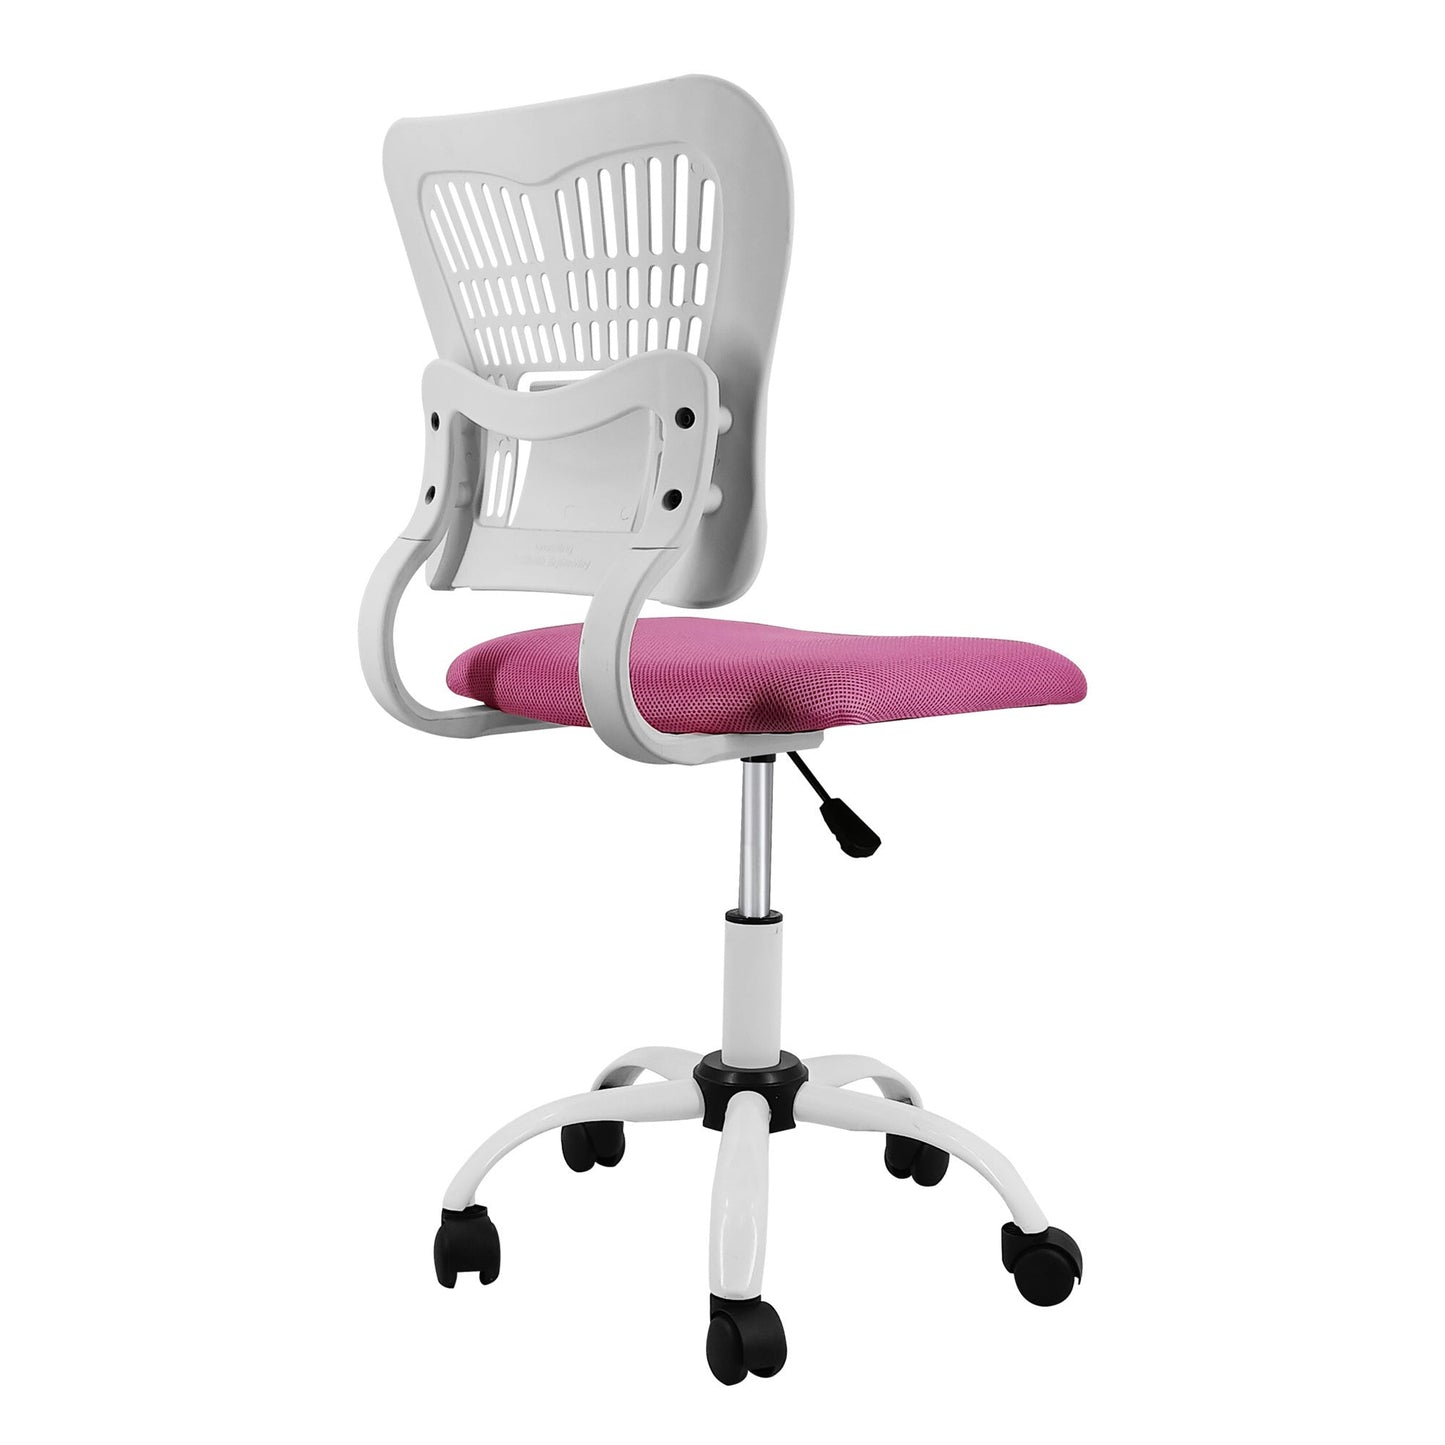 Home Office Chair Ergonomic Desk Chair Mesh Computer Adjustable Height Seat 360° Swivel Gaming Armless Chair Task-Pink